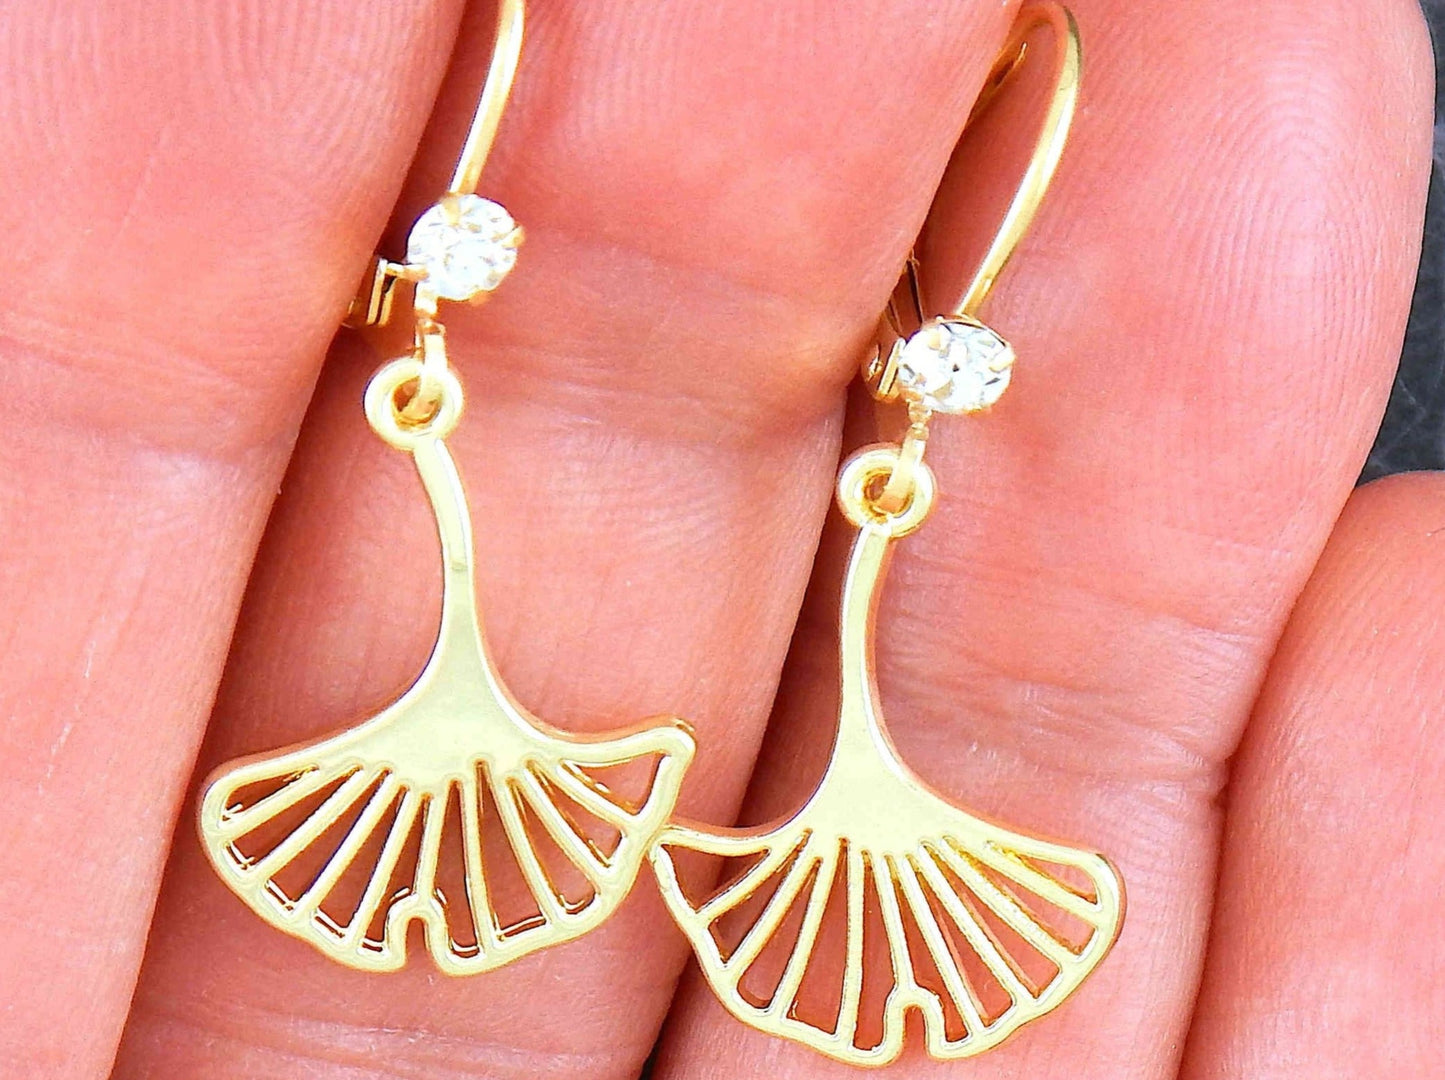 Short earrings with delicate golden ginko tree leaves, gold-toned stainless steel lever back hooks with tiny clear Swarovski crystals